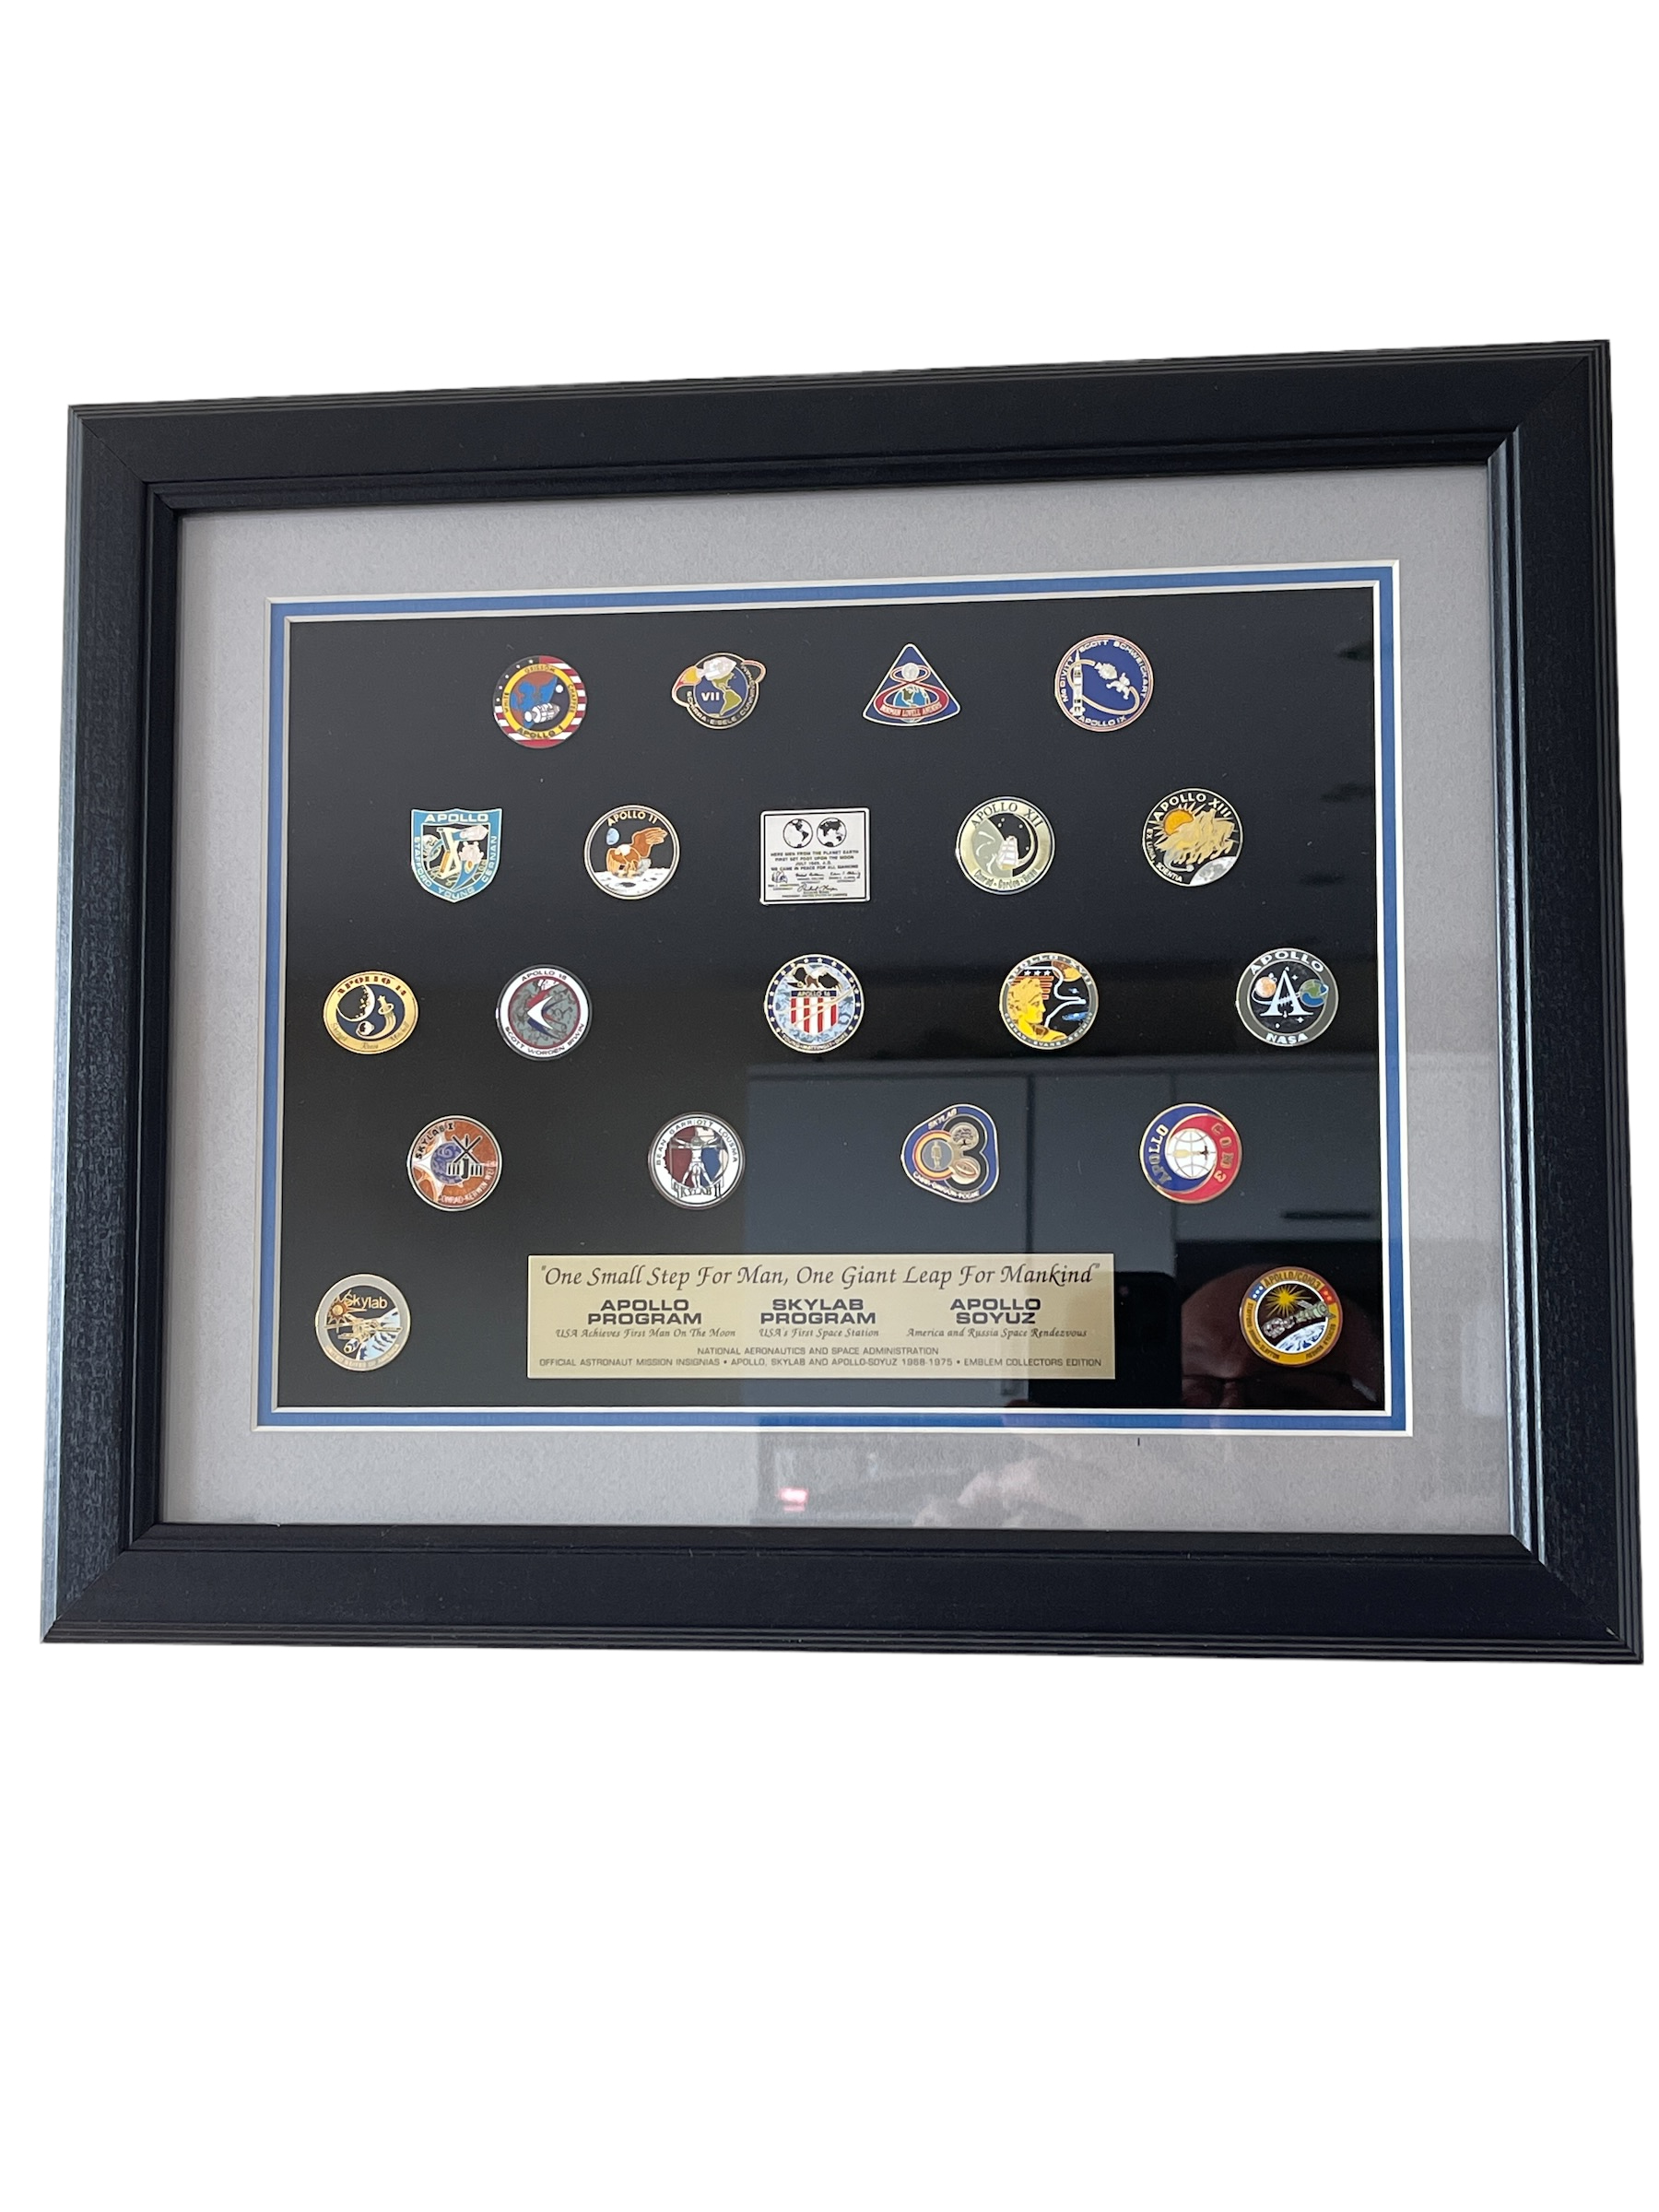 Framed Collection of NASA Pins - "One Small Step for Man, One Giant Leap for Mankind" - Image 2 of 3